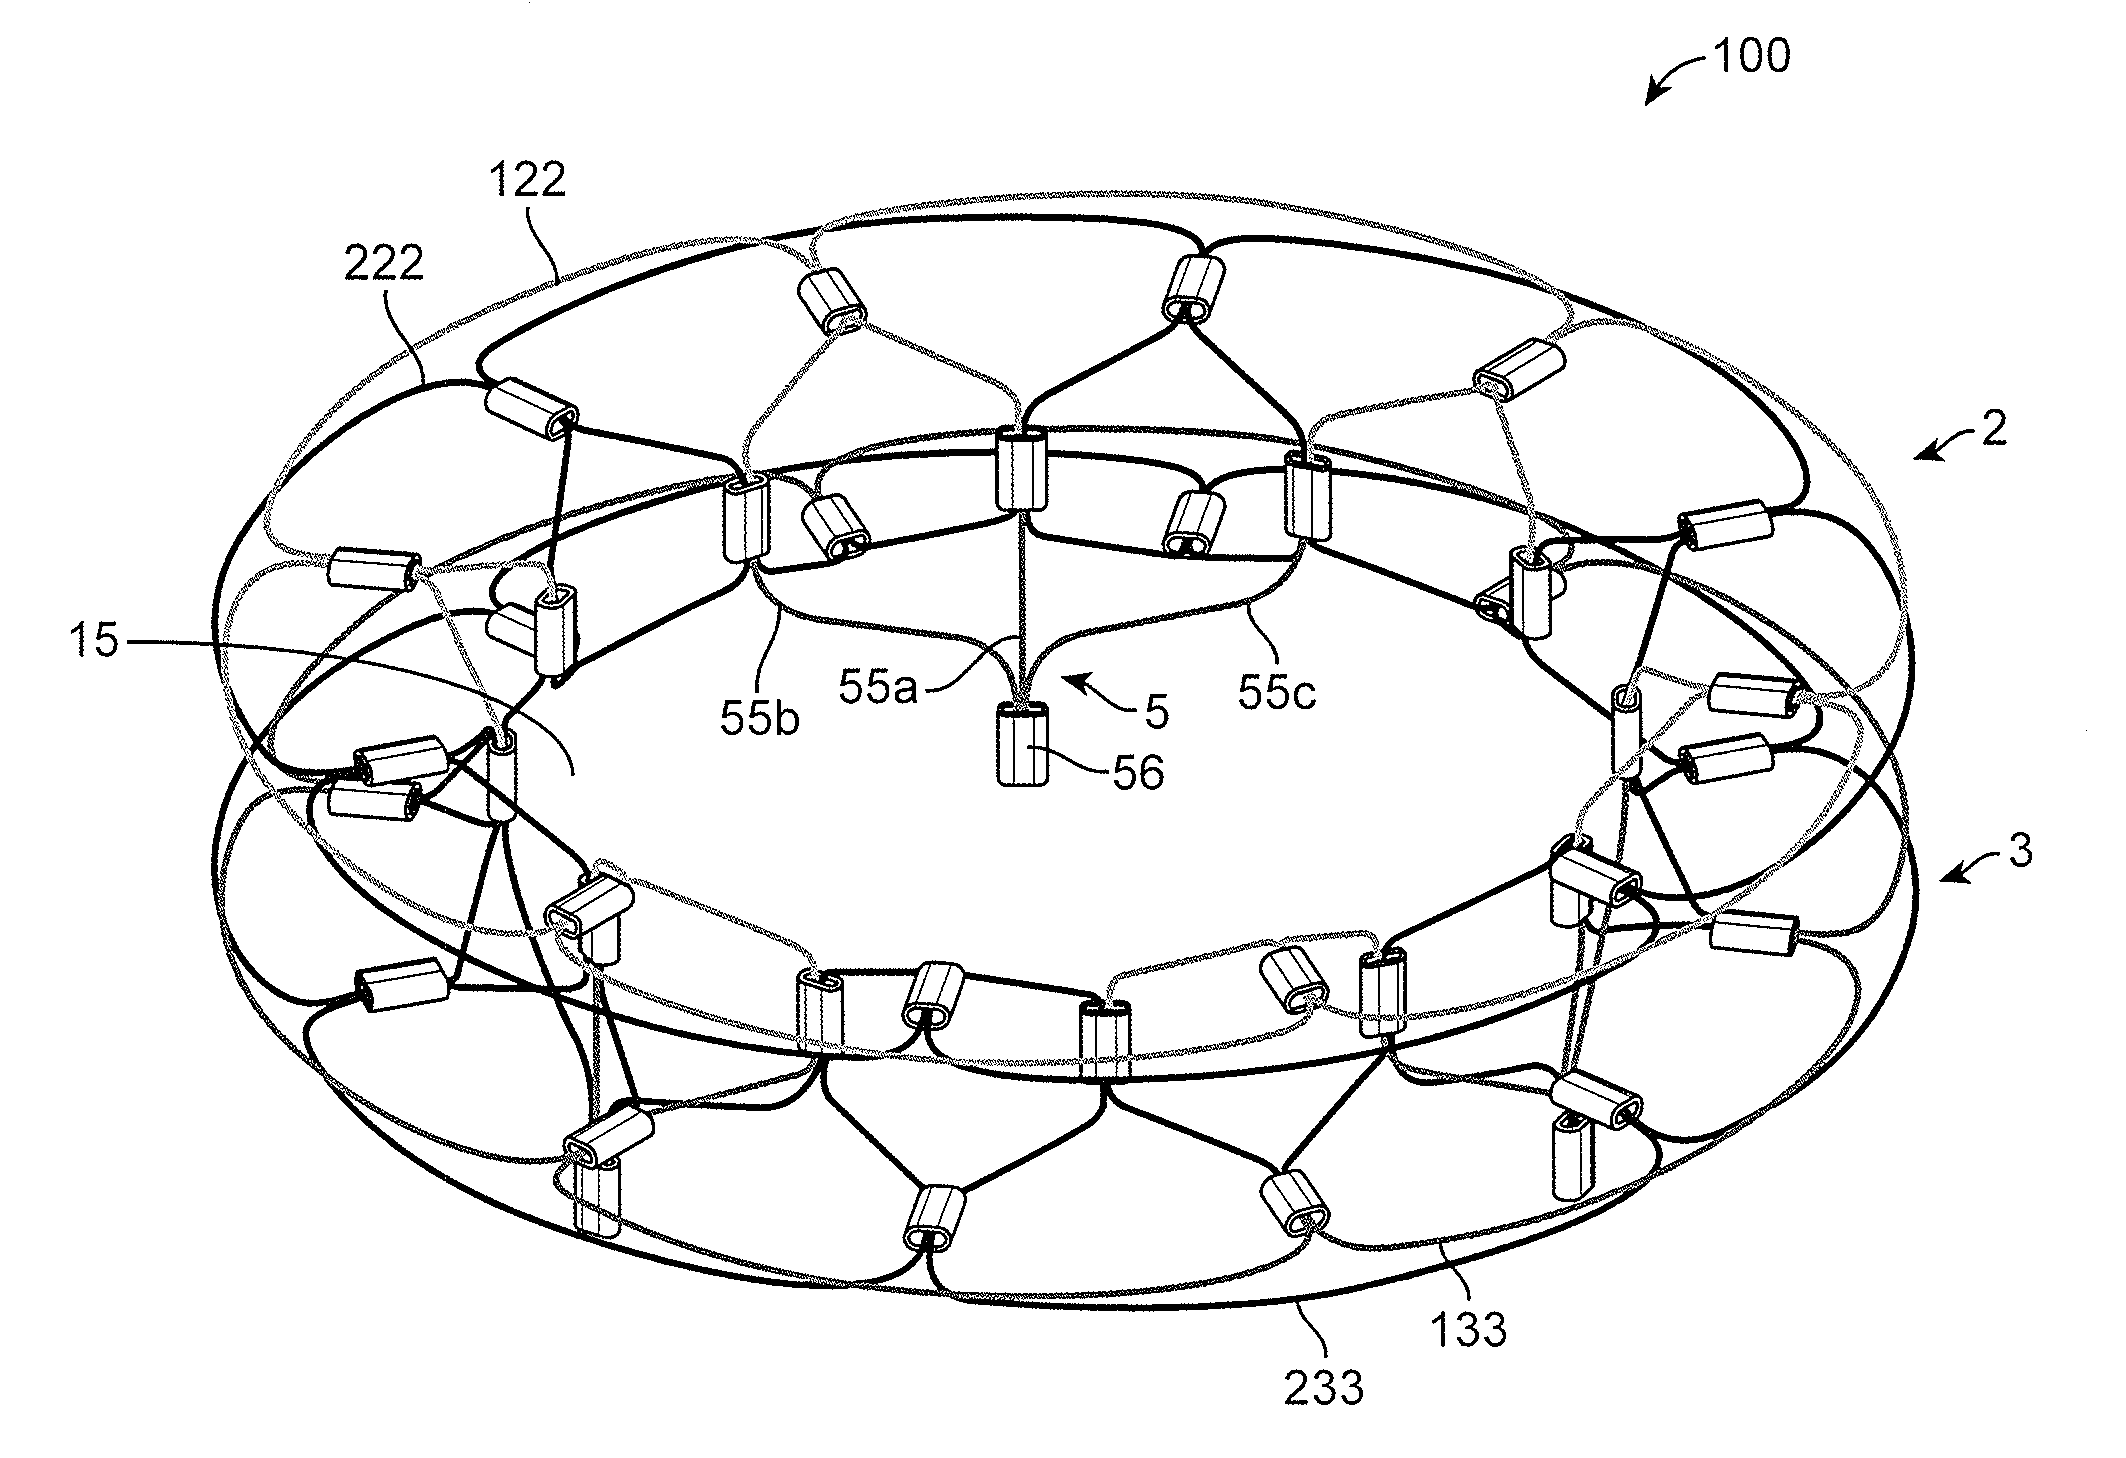 System and method for cardiac valve repair and replacement